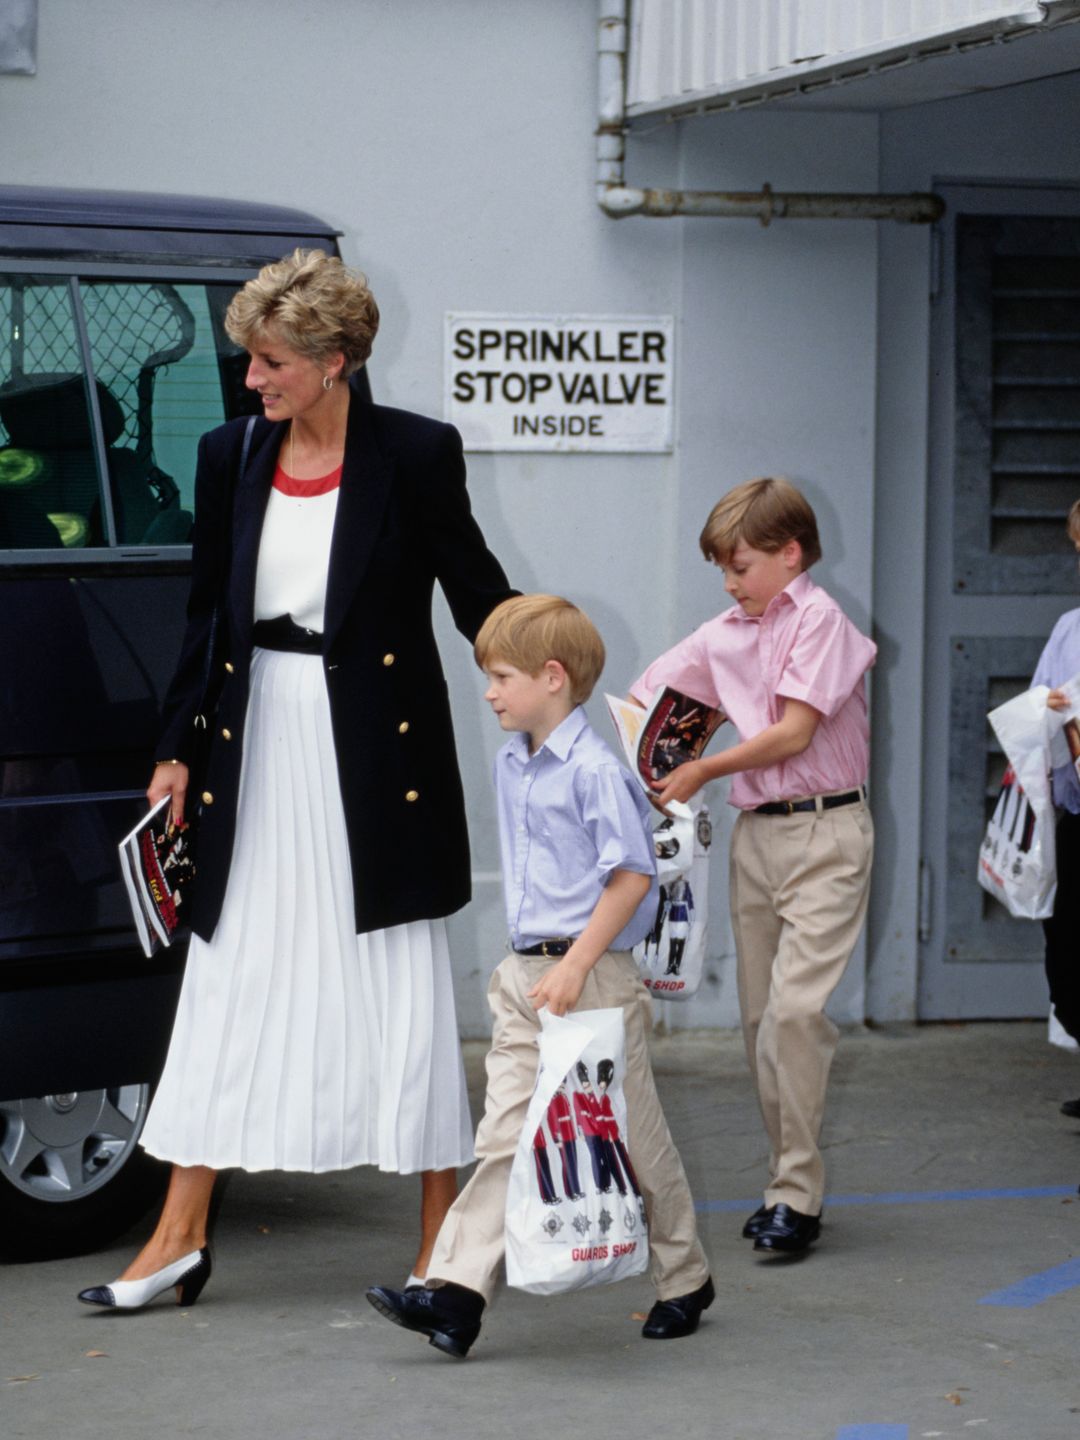 Princess Diana wearing a dark blazer with a pleated white skirt with a young Prince William and Harry  